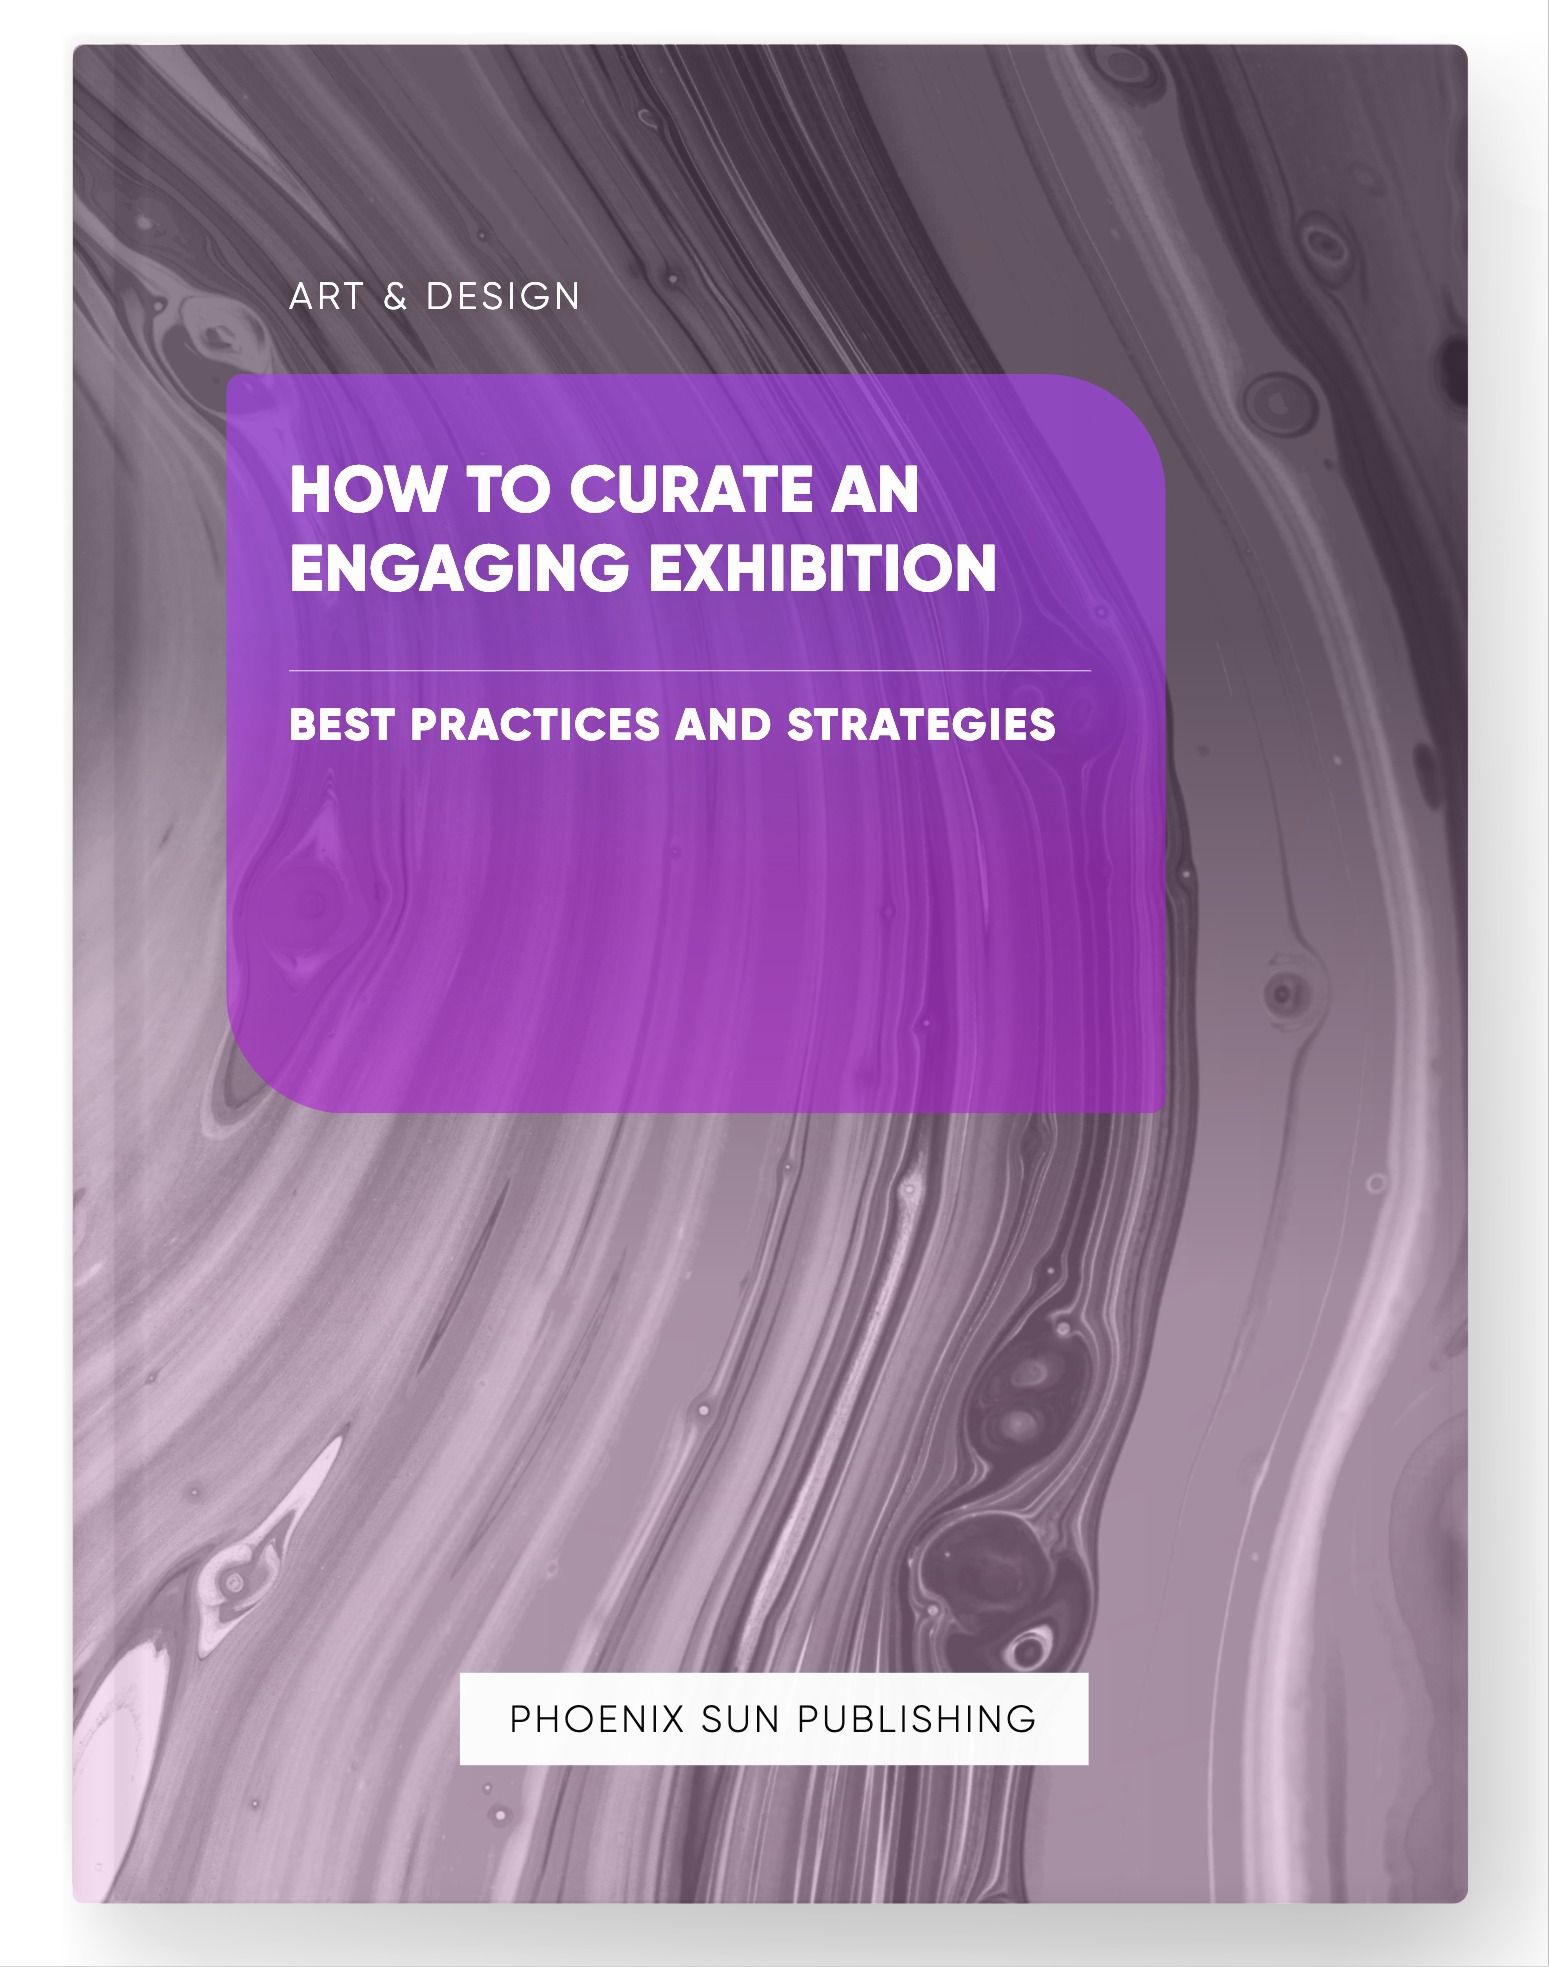 How to Curate an Engaging Exhibition – Best Practices and Strategies